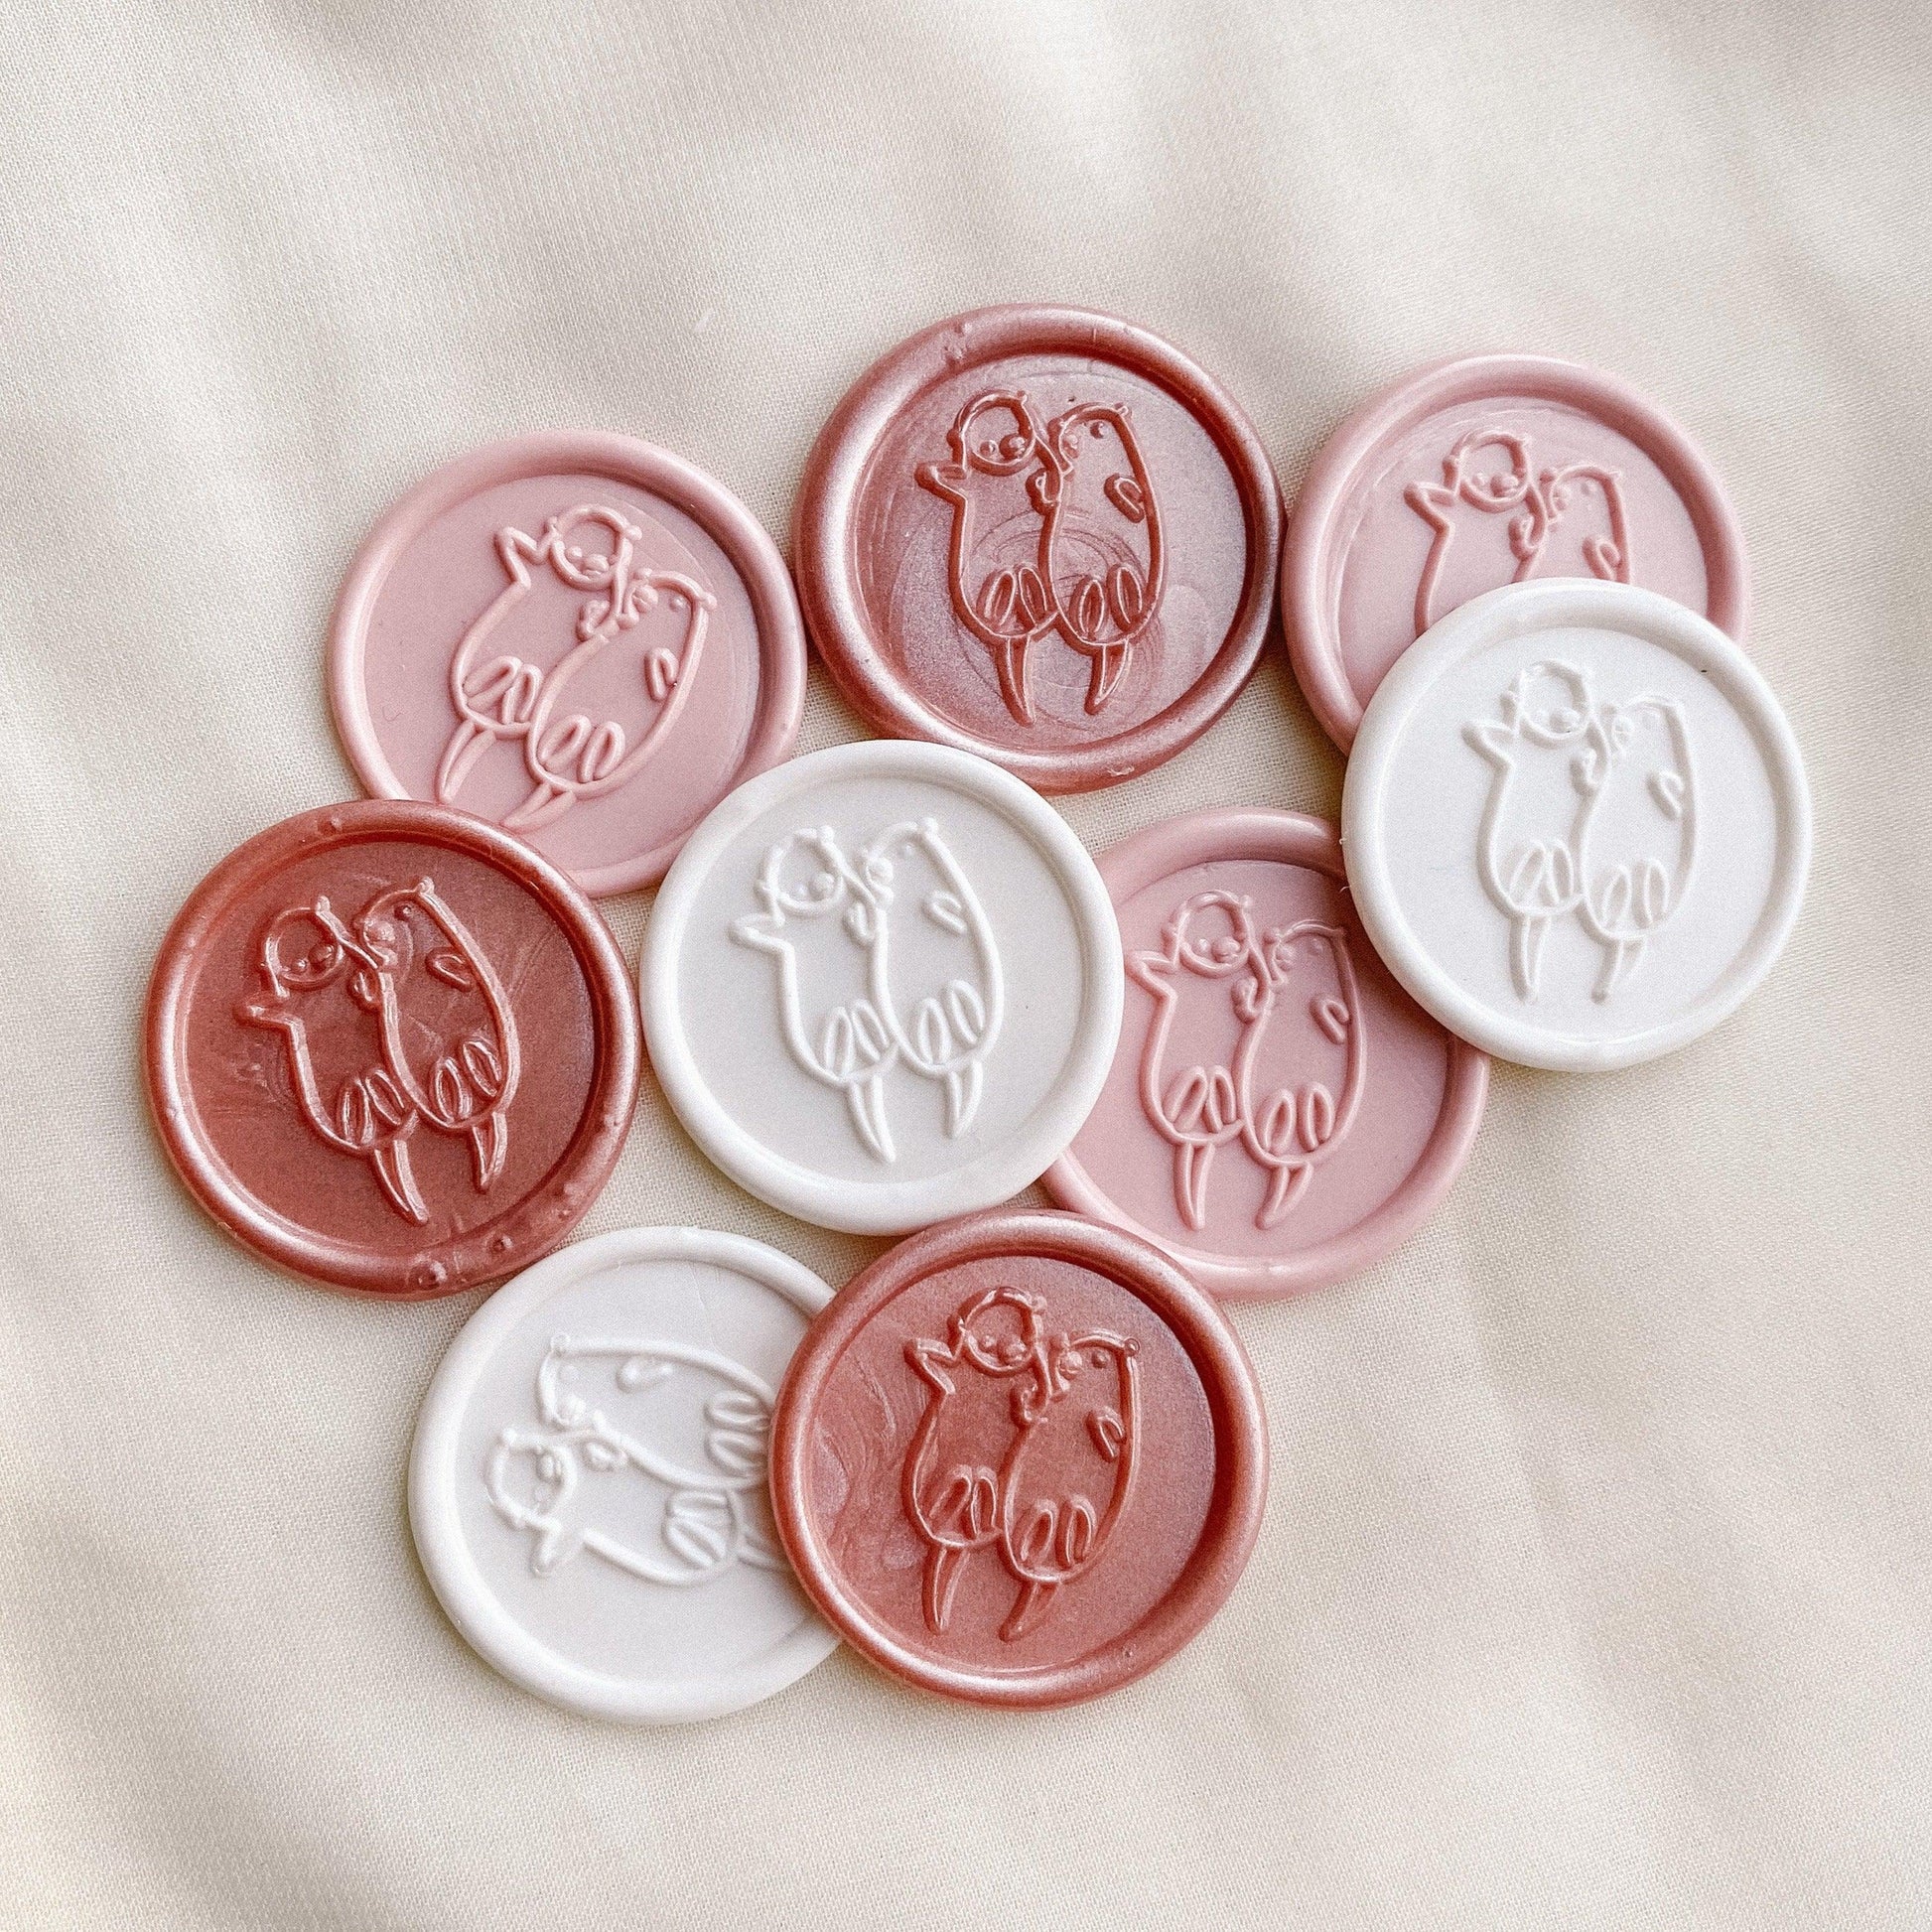 Otter wax seal set - Made of Honour Co.